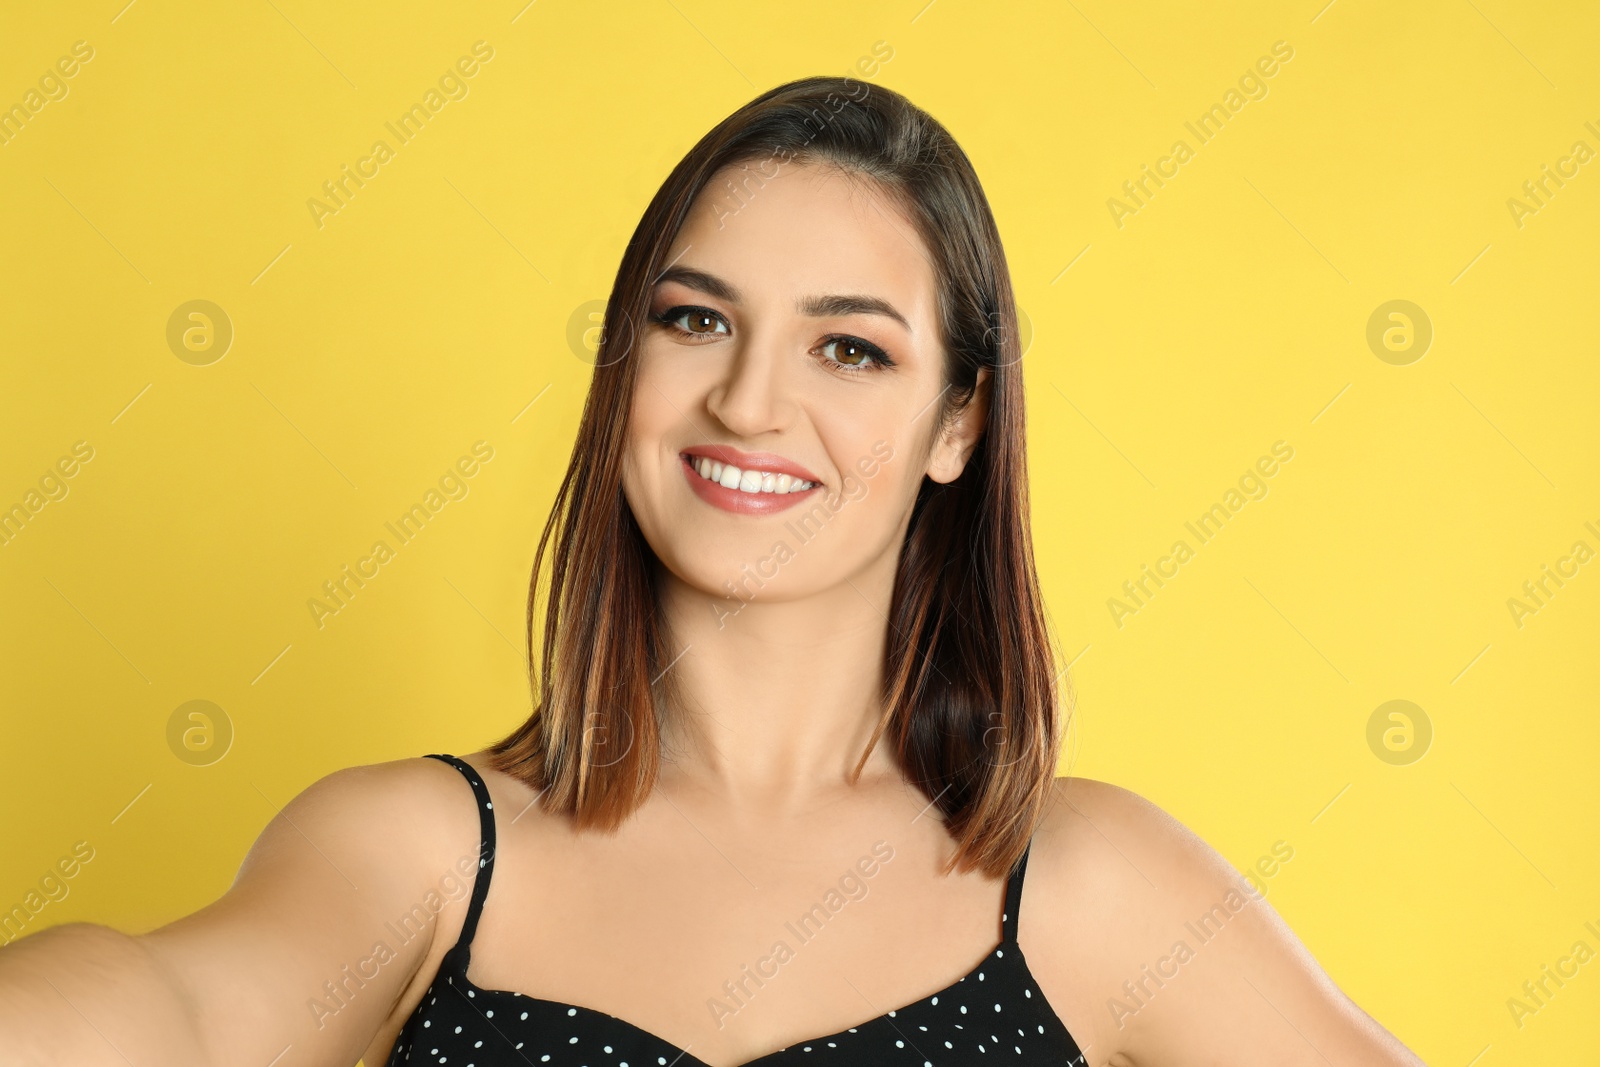 Photo of Beautiful young woman taking selfie on yellow background